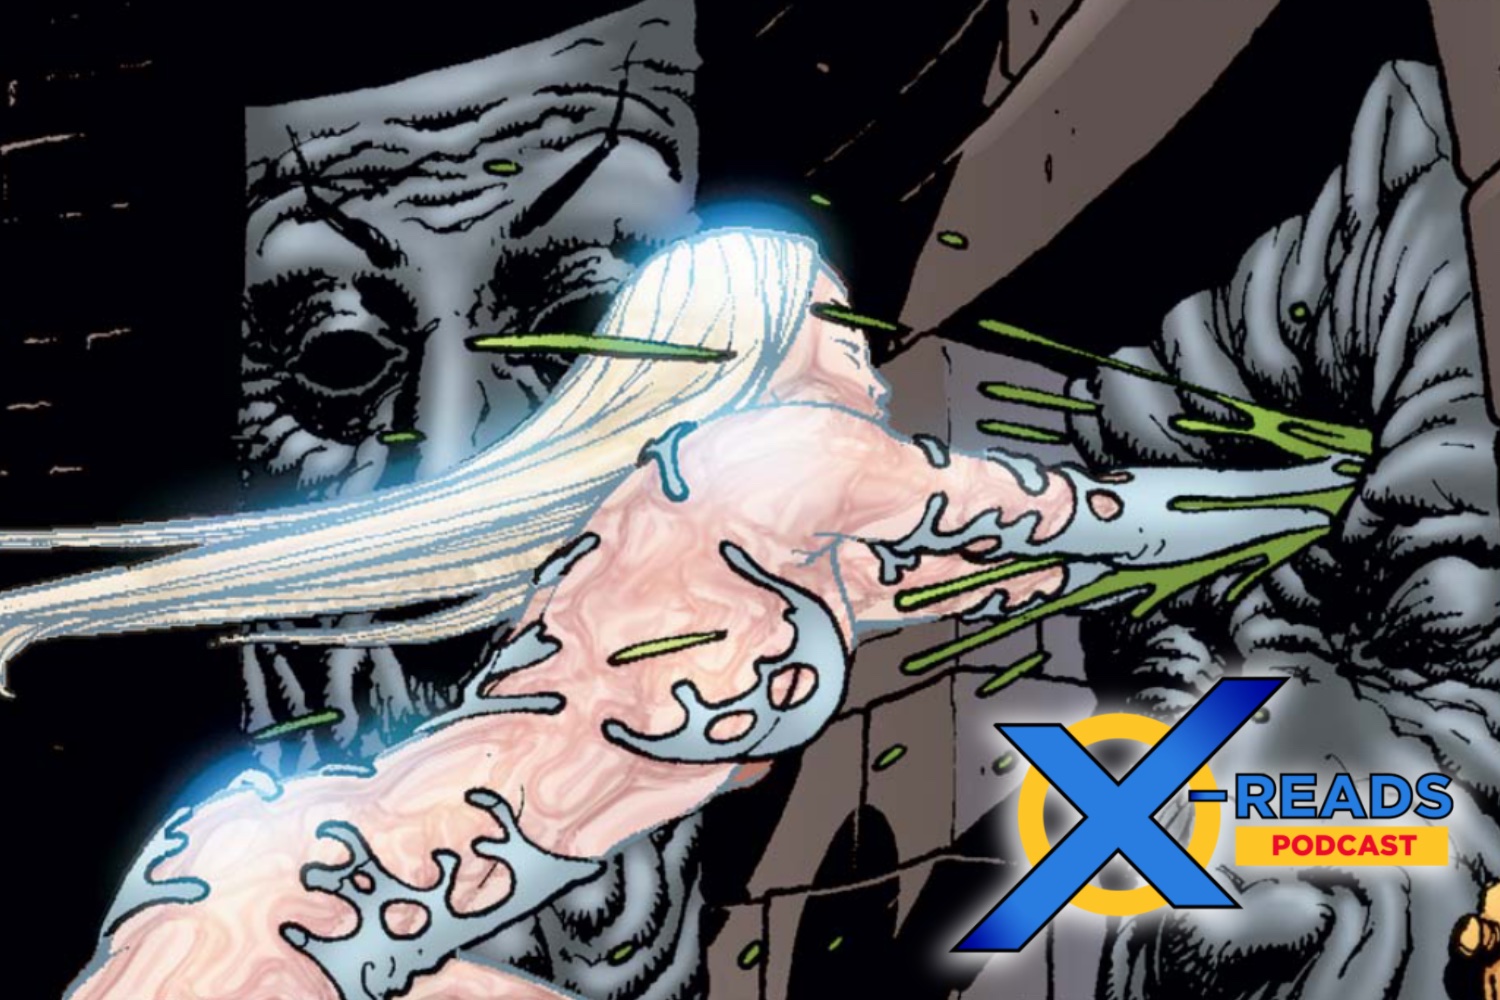 X-Reads Podcast Episode 92: 'New X-Men' #121 with special guest Lucas Werneck